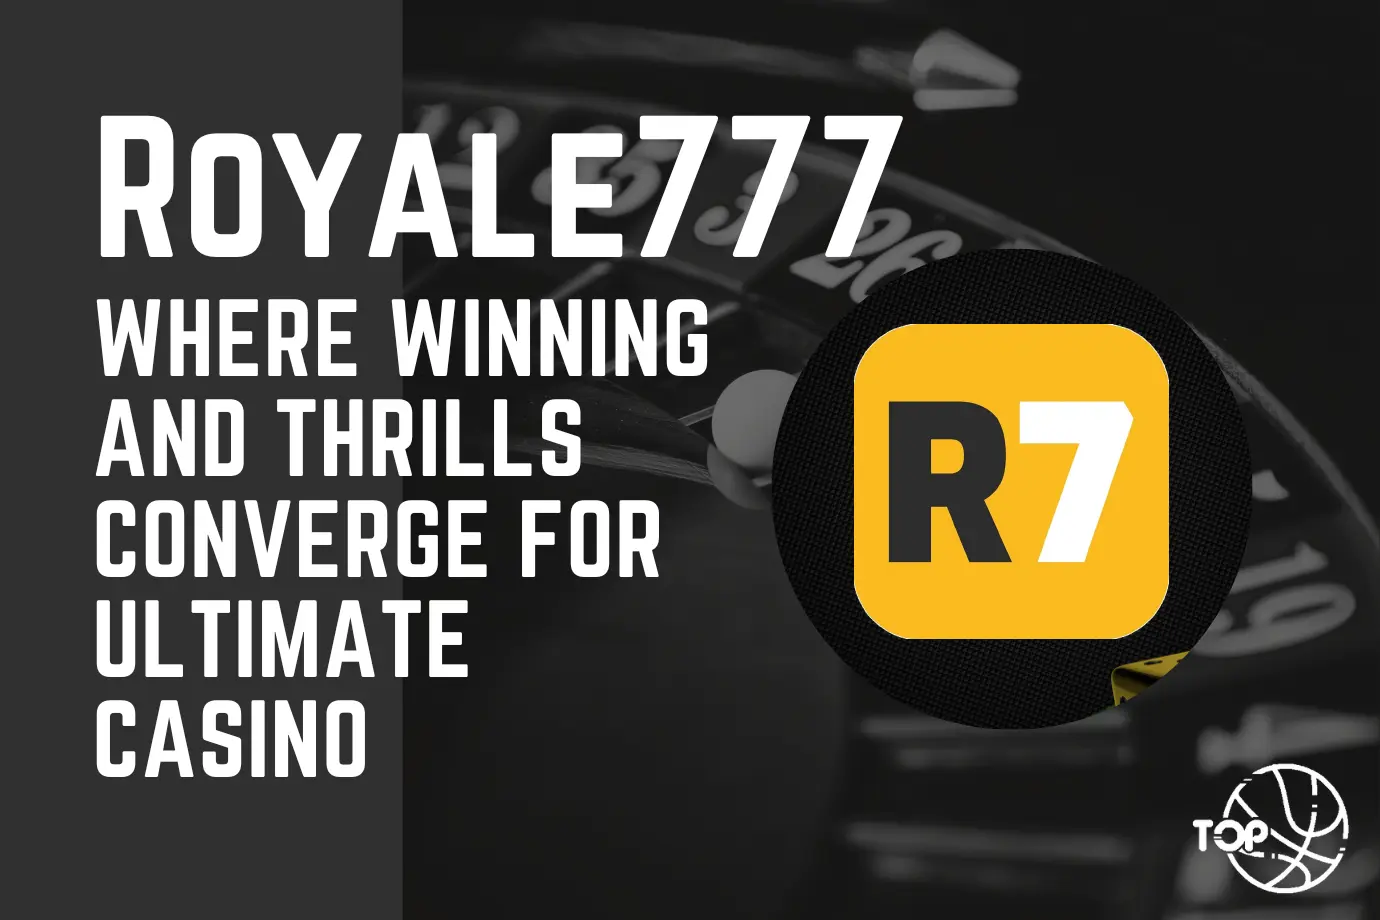 Royale777: Where Winning and Thrills Converge for Ultimate Casino